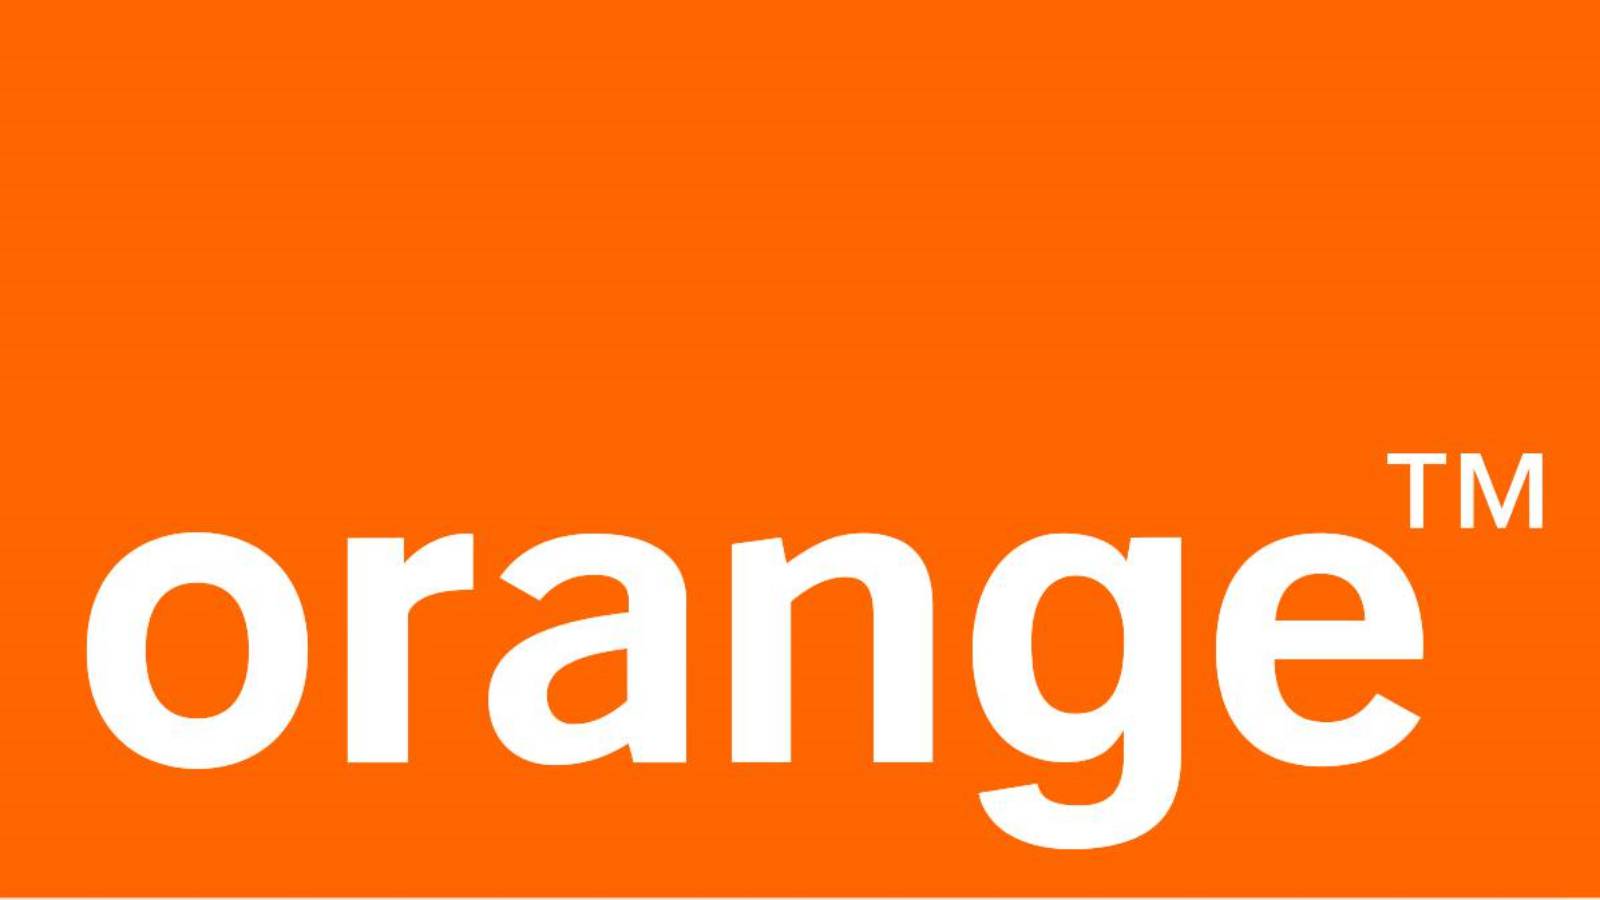 Orange Surprise Confirmed FREE to Millions of Customers